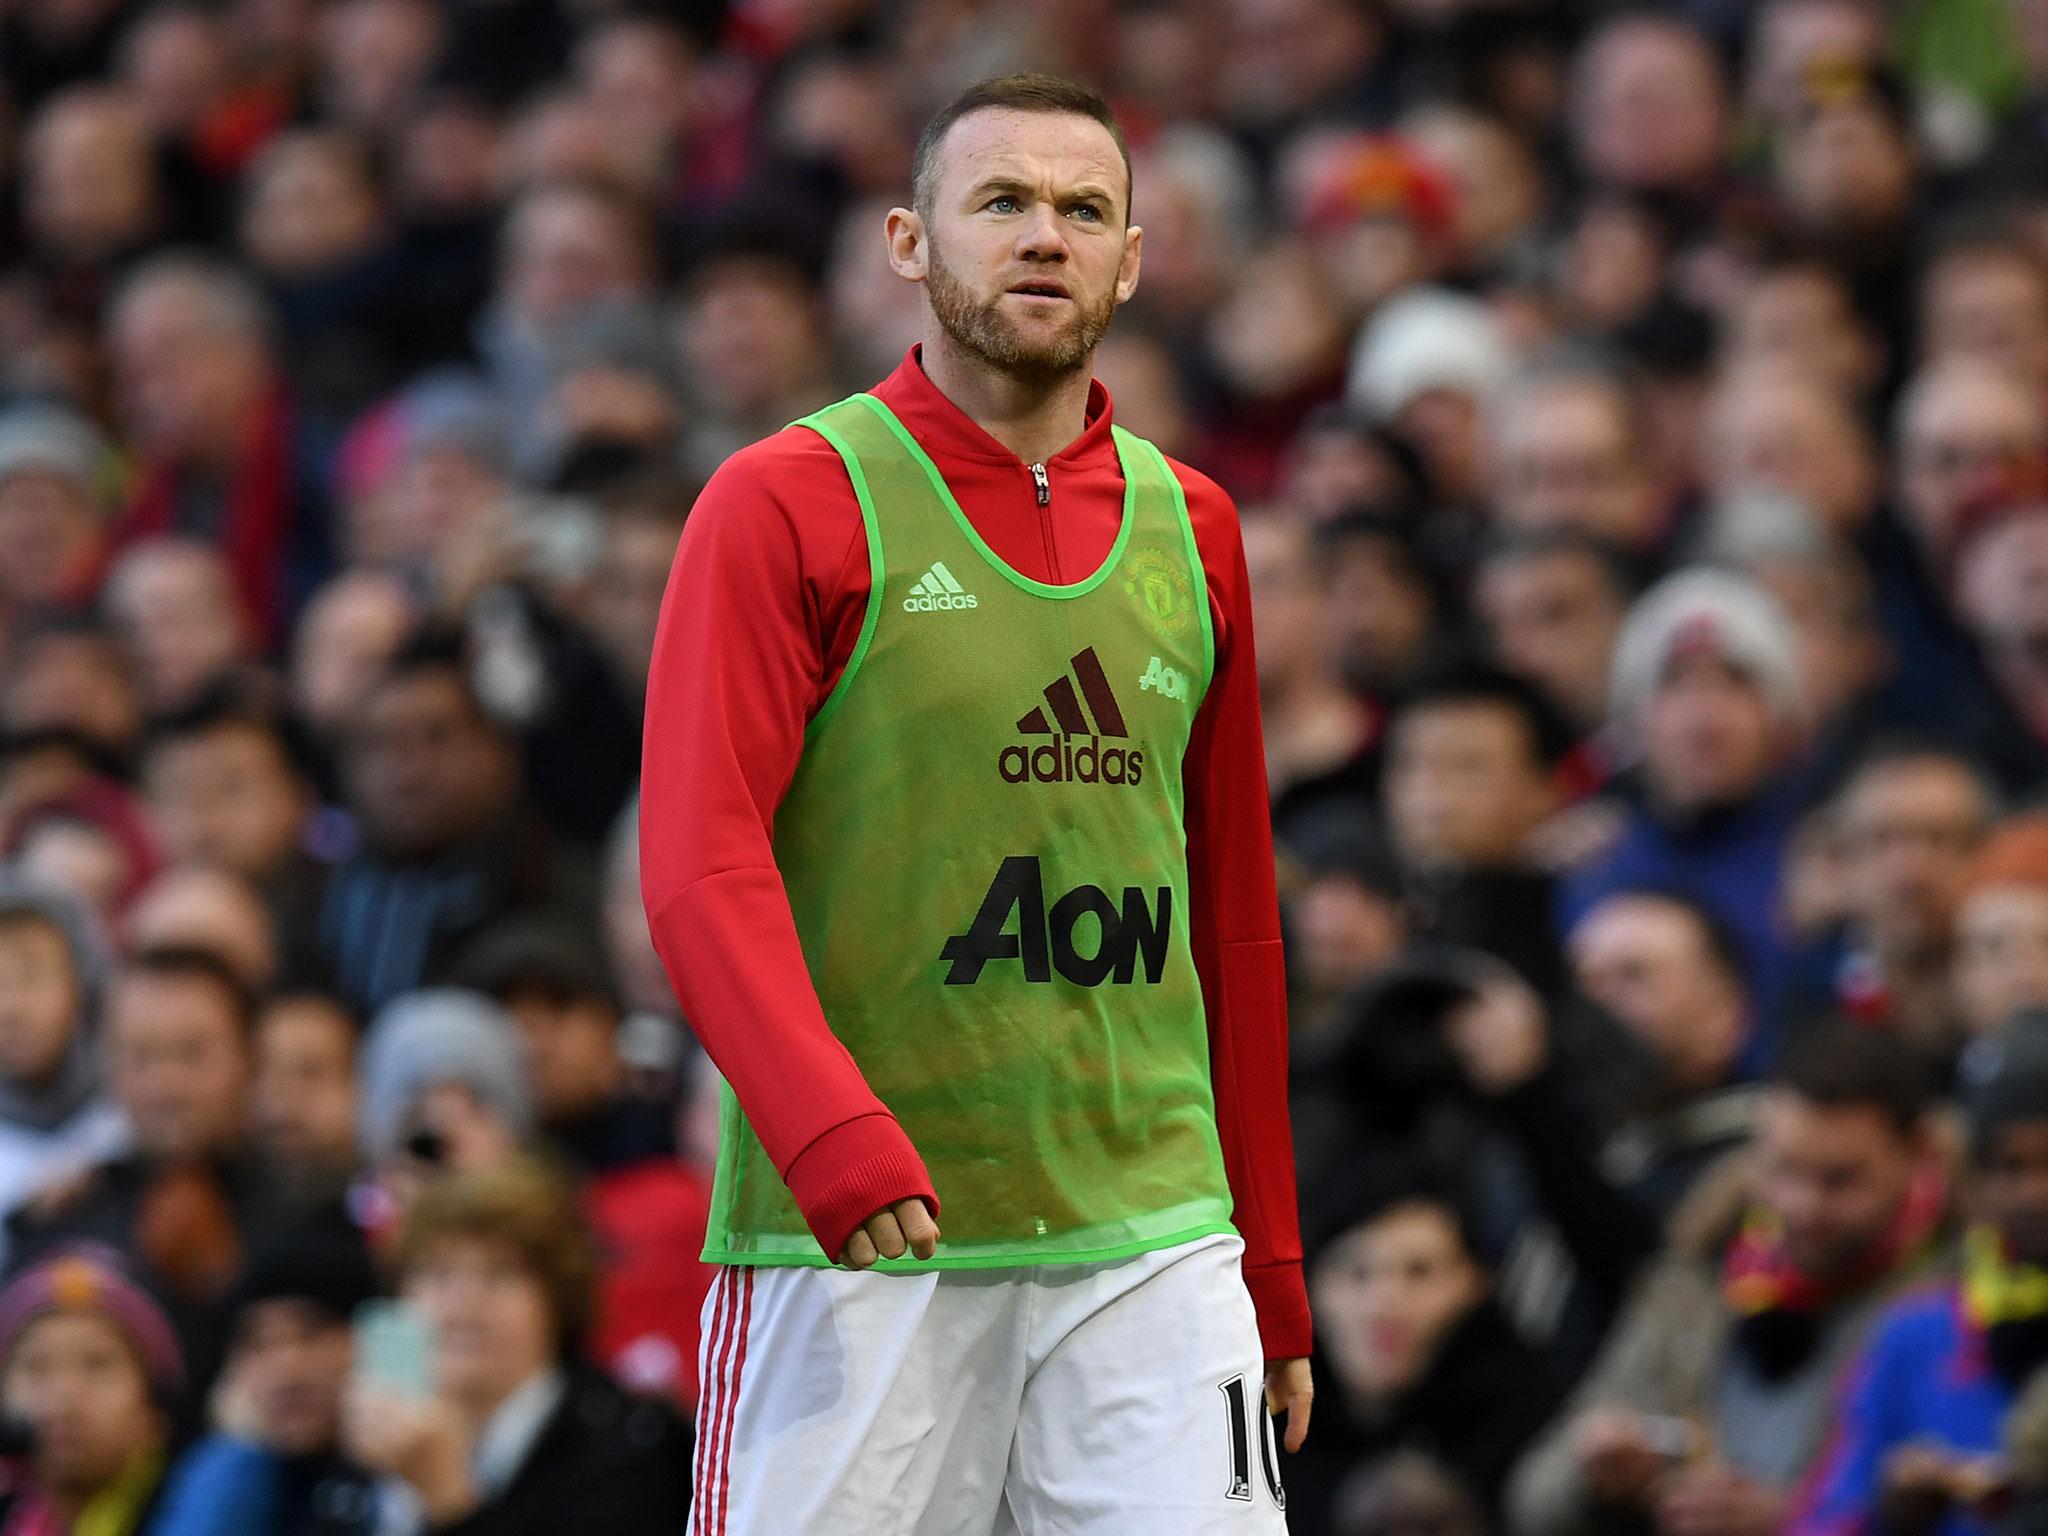 Manchester United news: Wayne Rooney hits out at 'disgraceful' treatment after coverage of drinking controversy